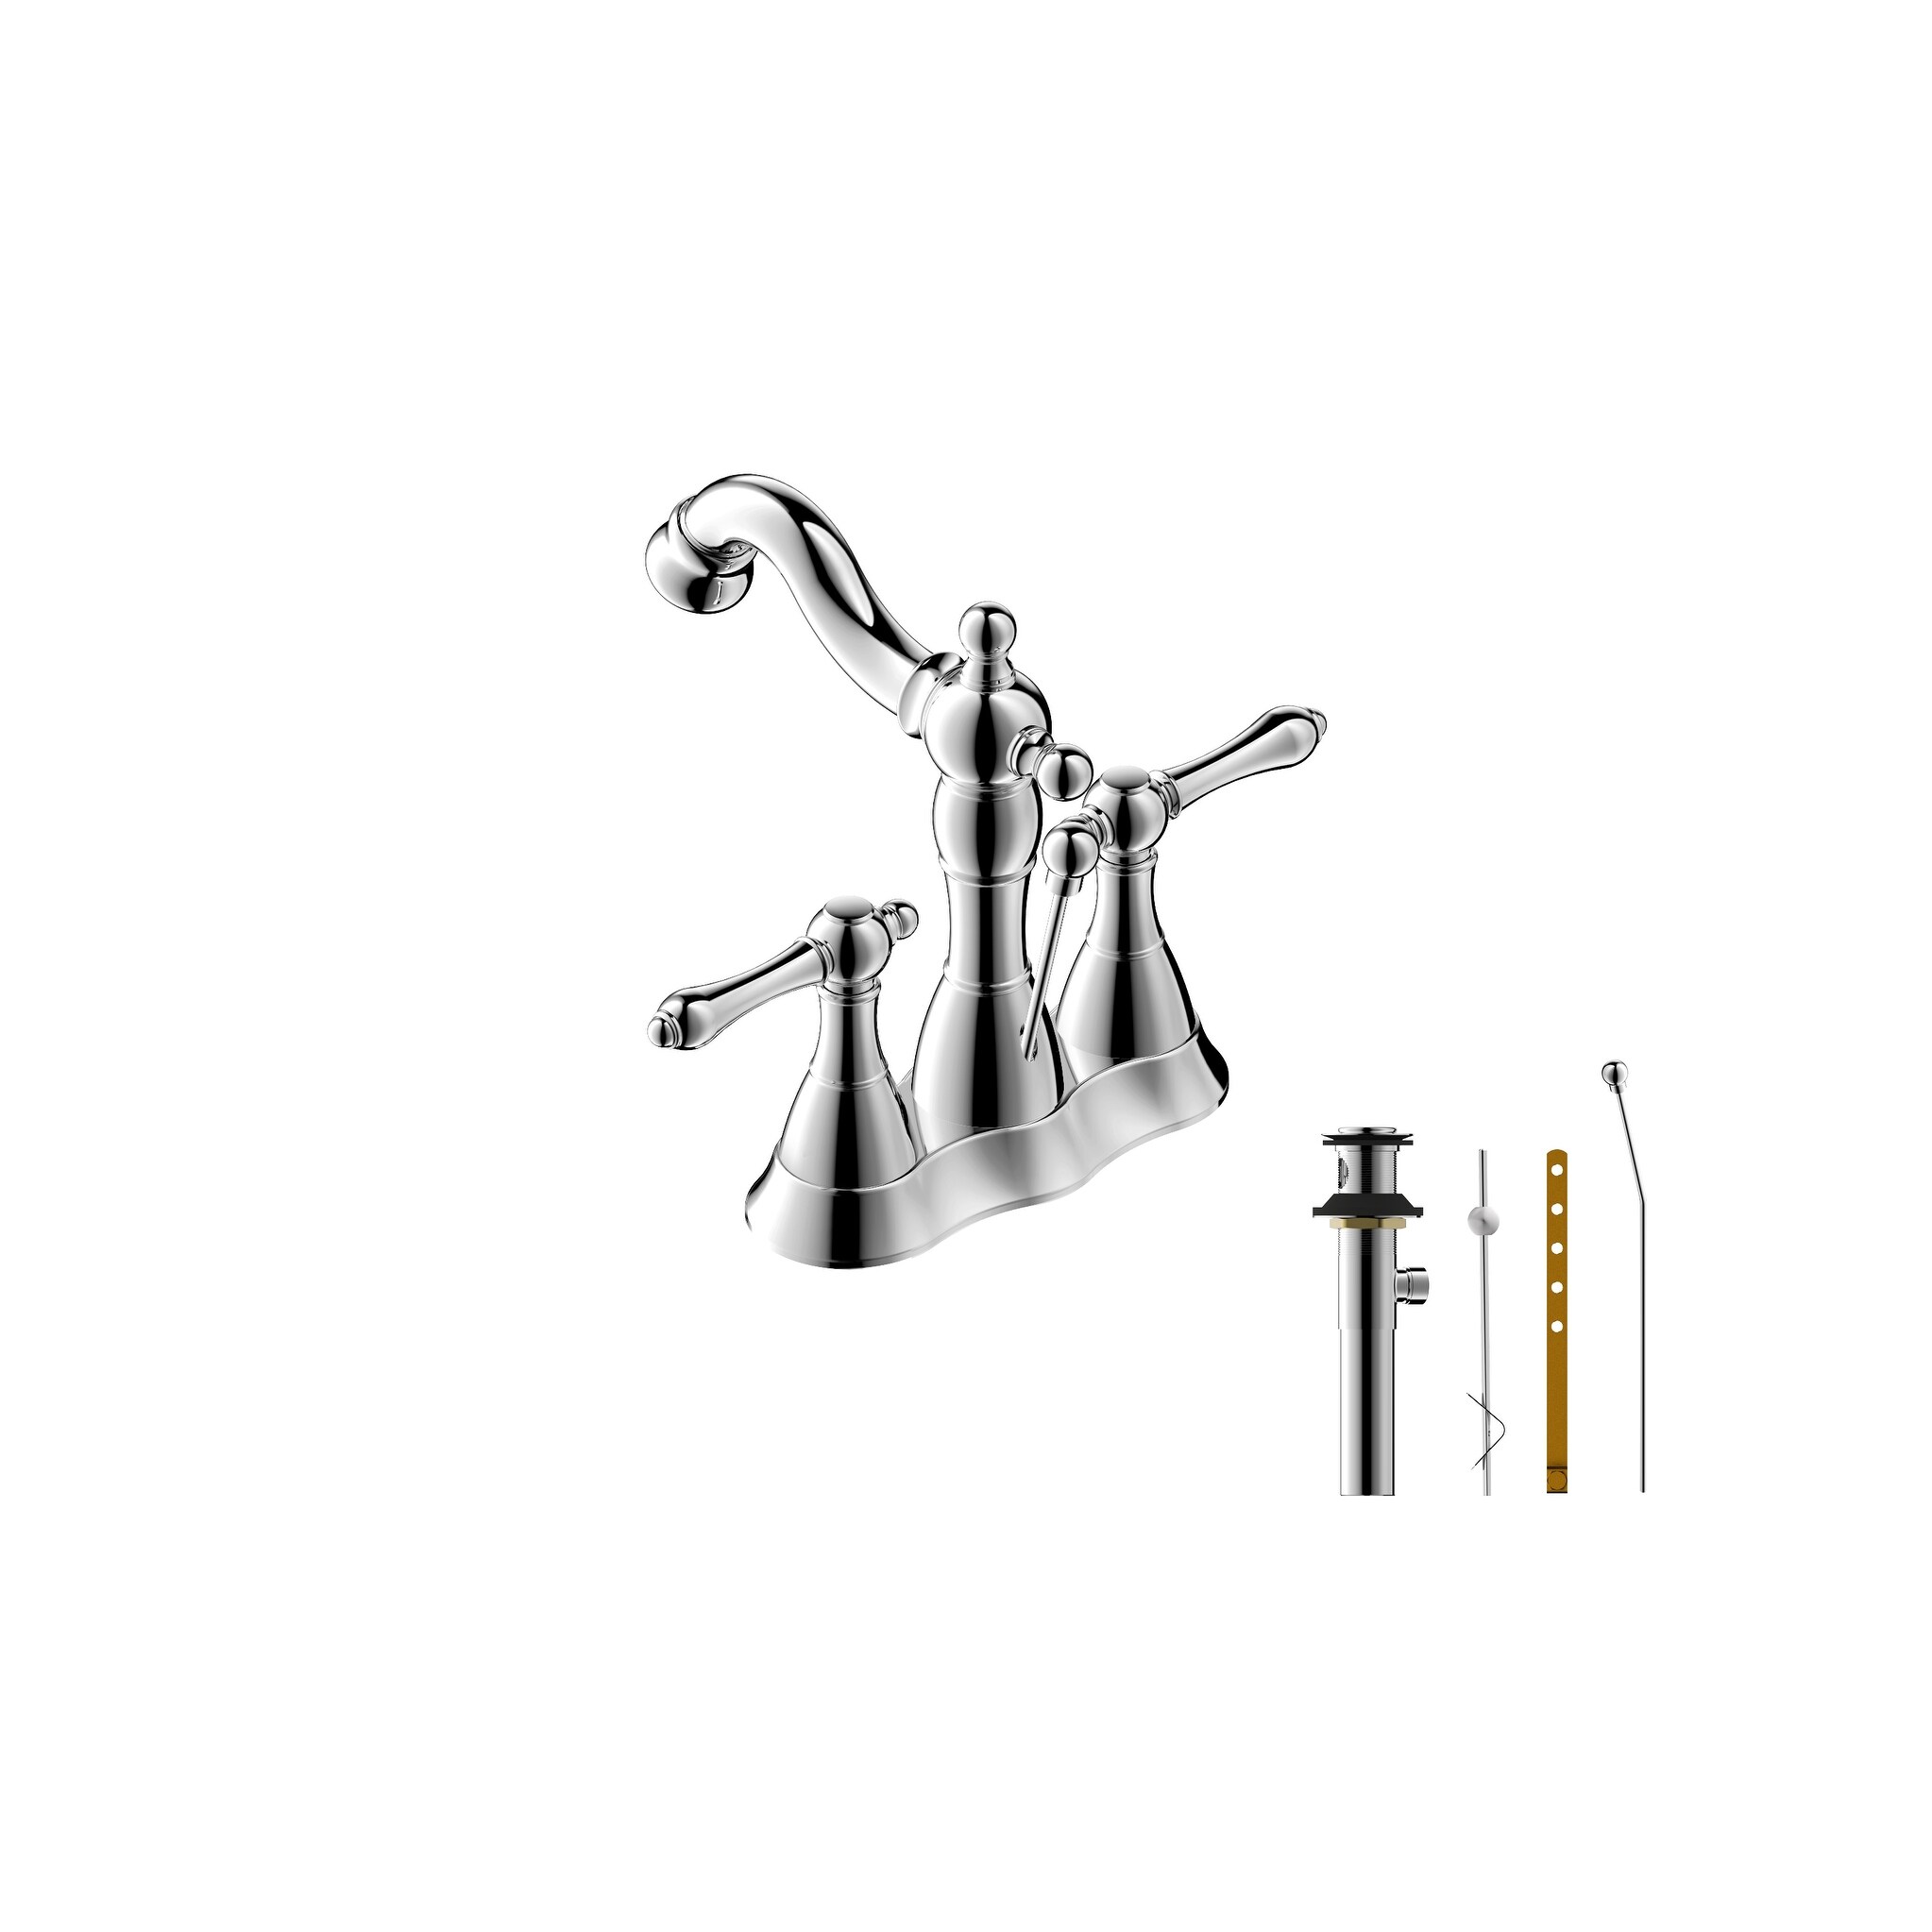 Ultra Faucets UF45213 Prime Two-Handle Centerset Bathroom Faucet, Brushed Nickel - image 4 of 4